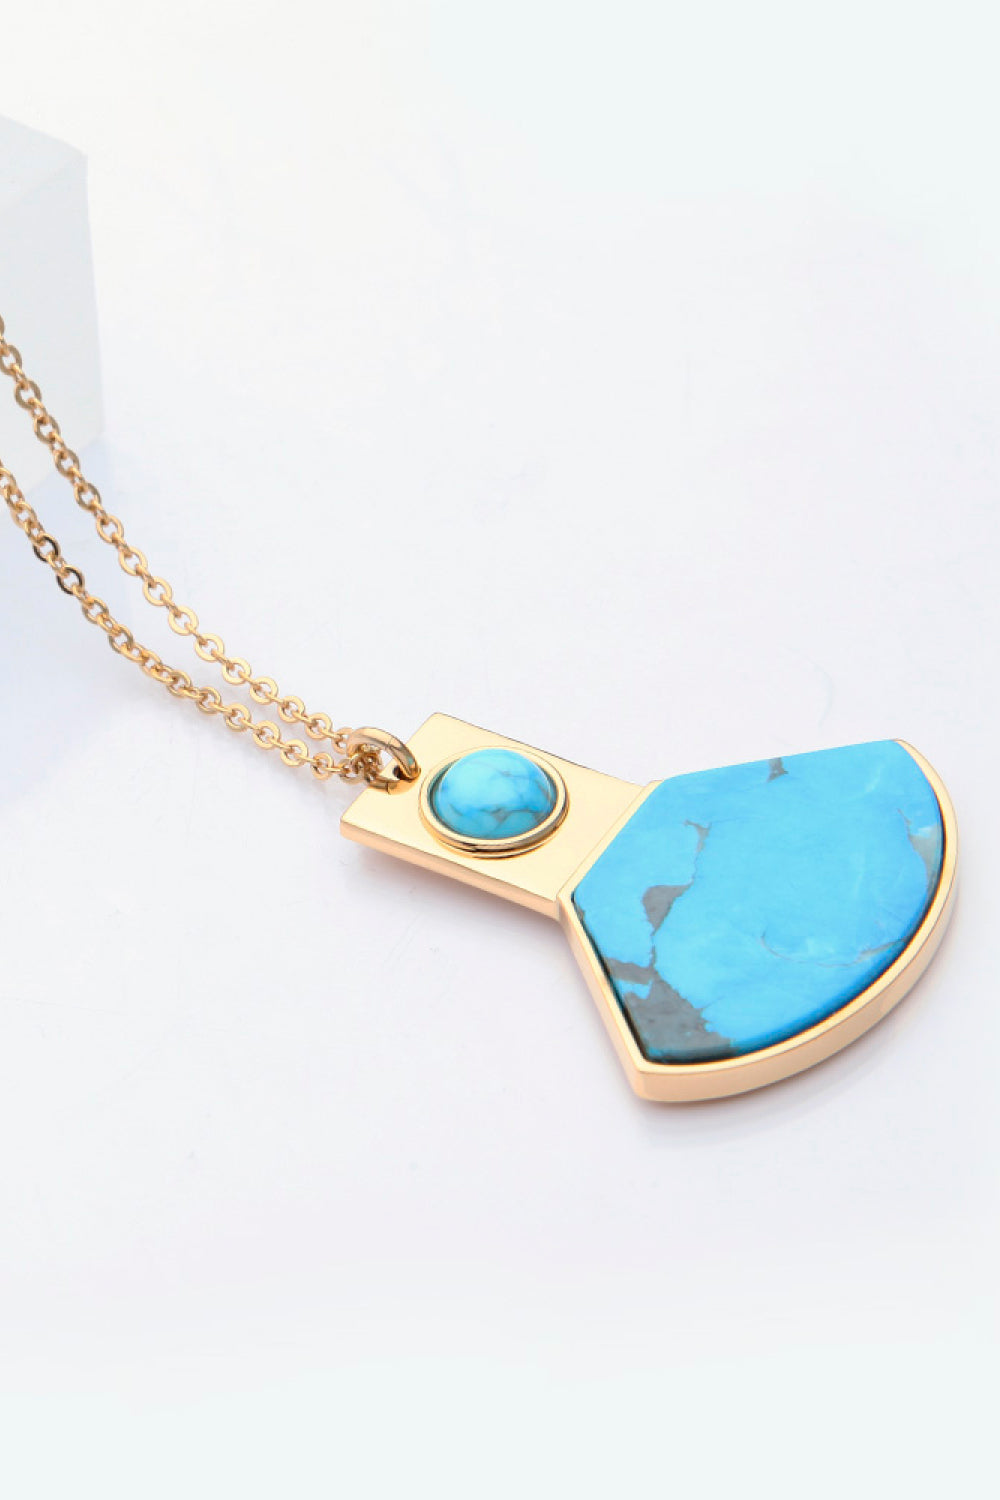 18K Gold Plated Turquoise Pendant Necklace